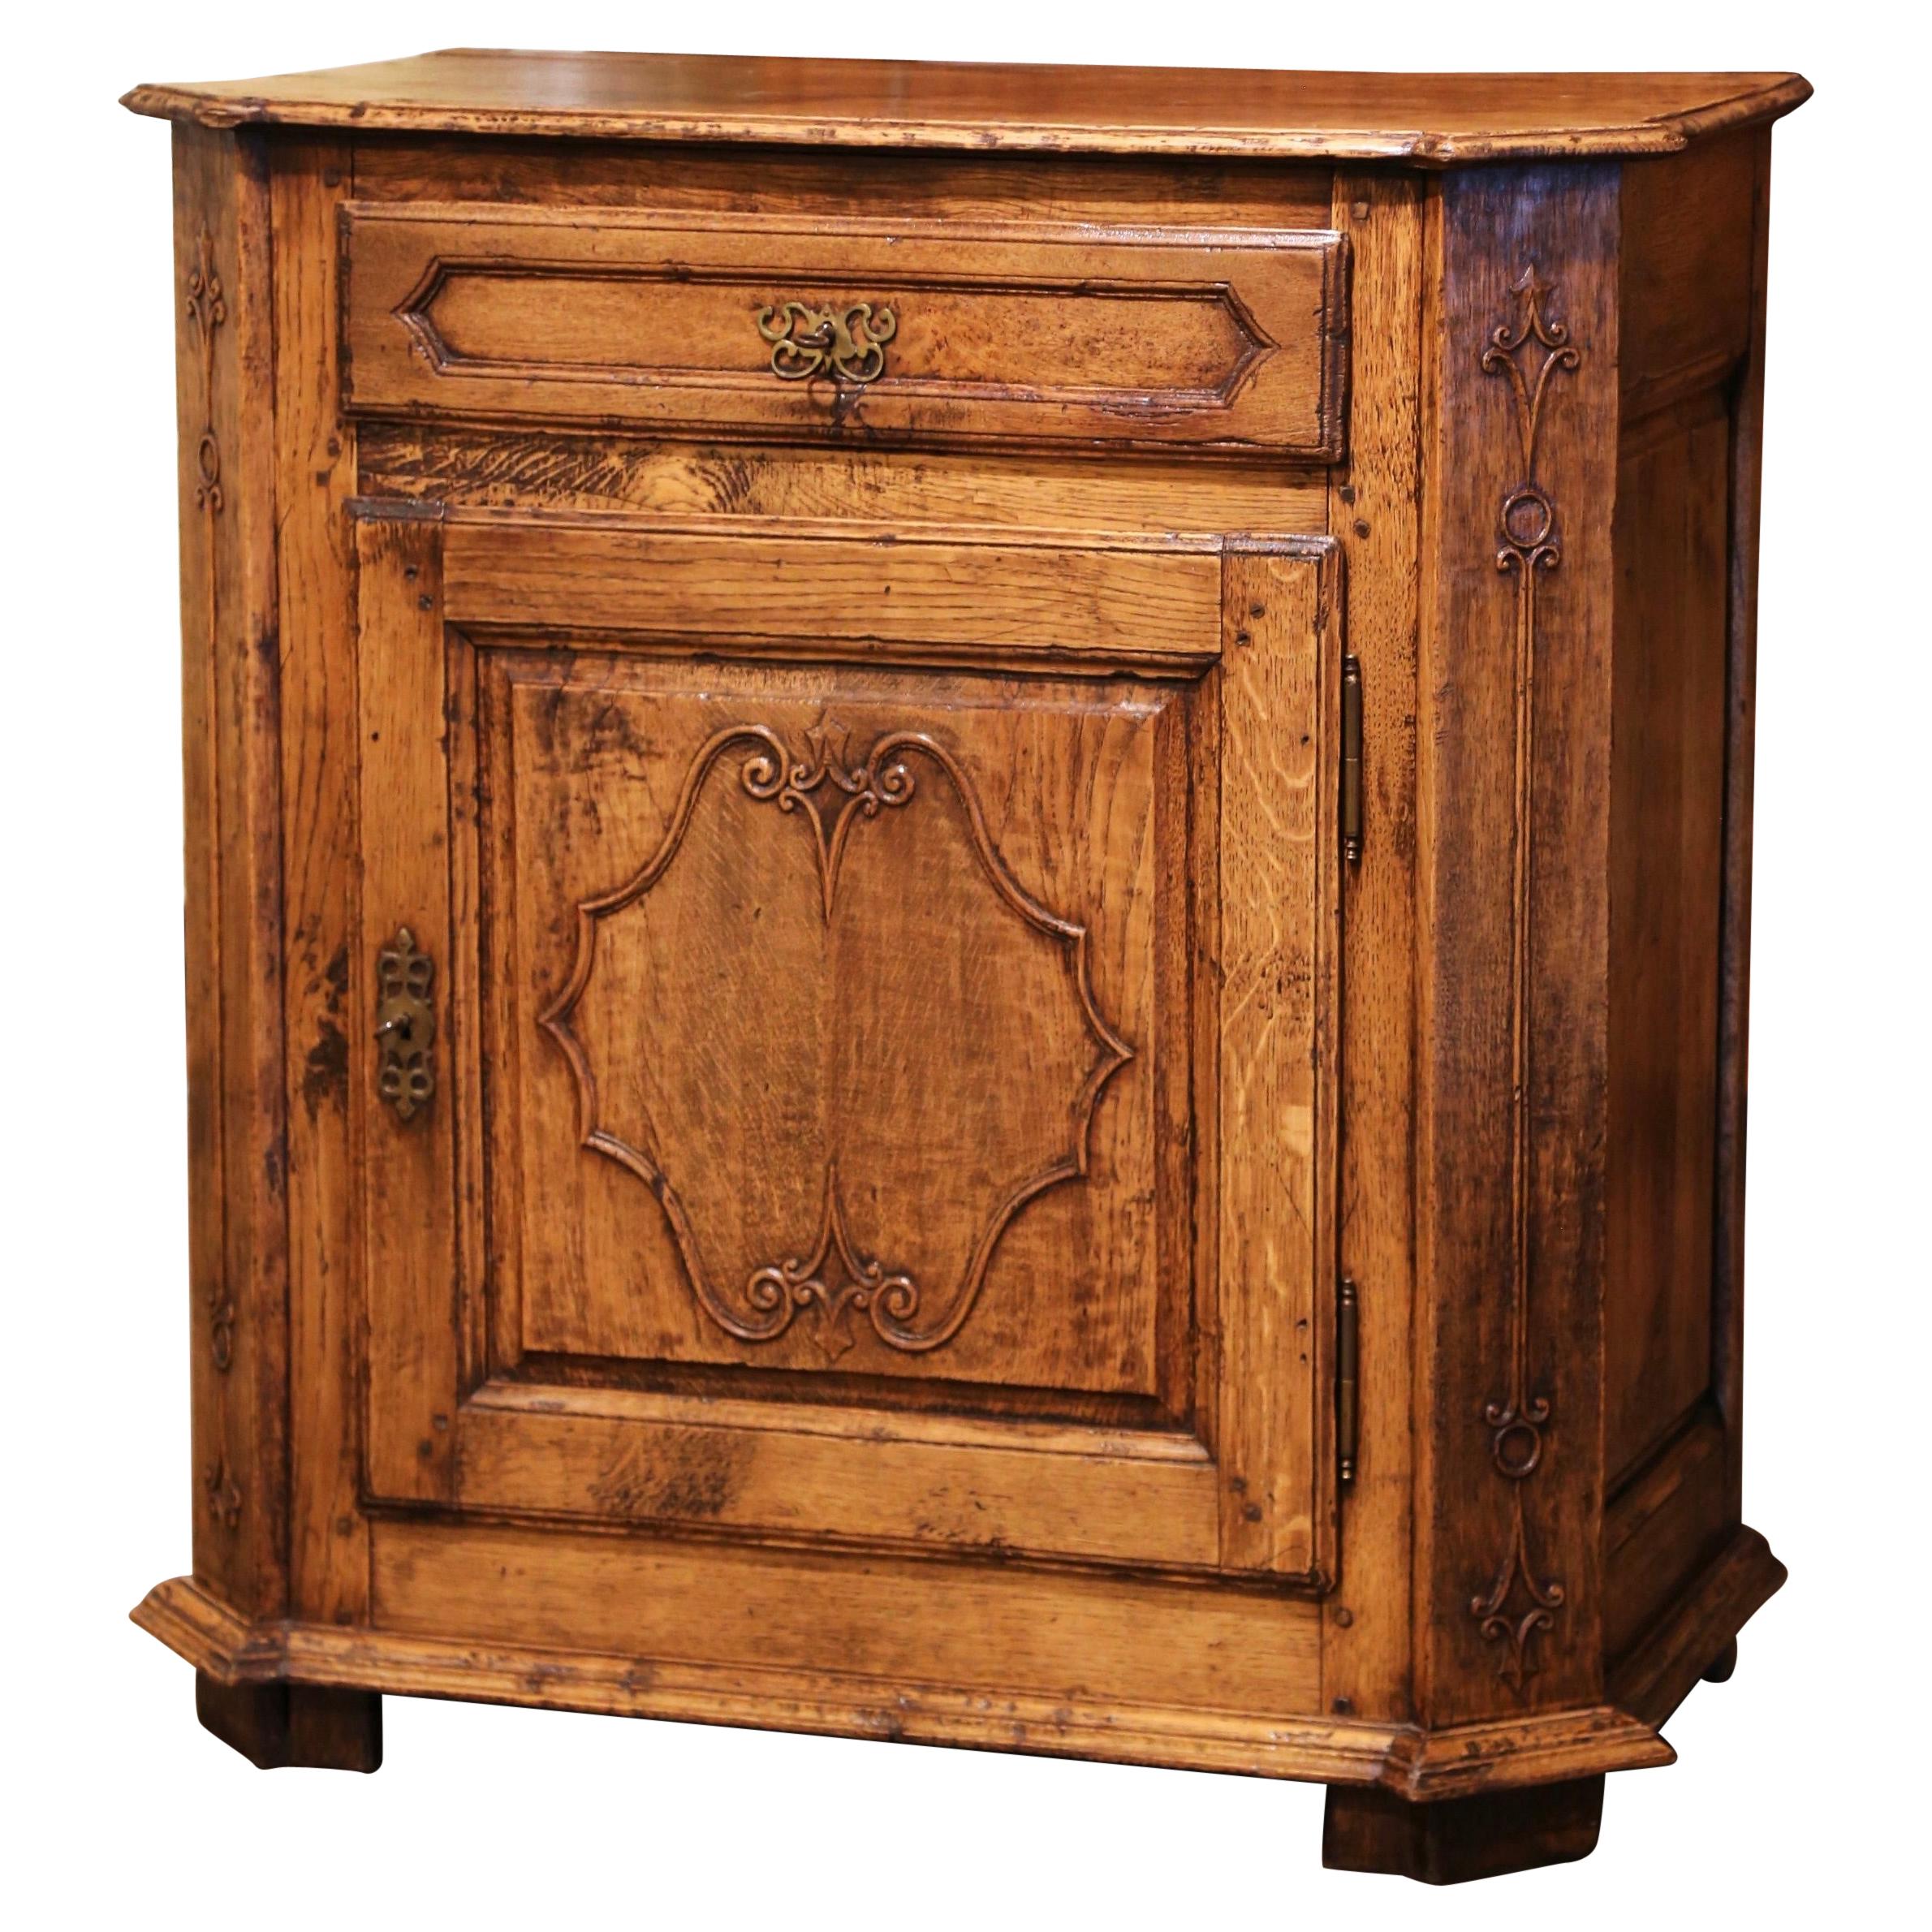 Mid-19th Century French Louis XIV Carved Oak and Chestnut Confiturier Cabinet